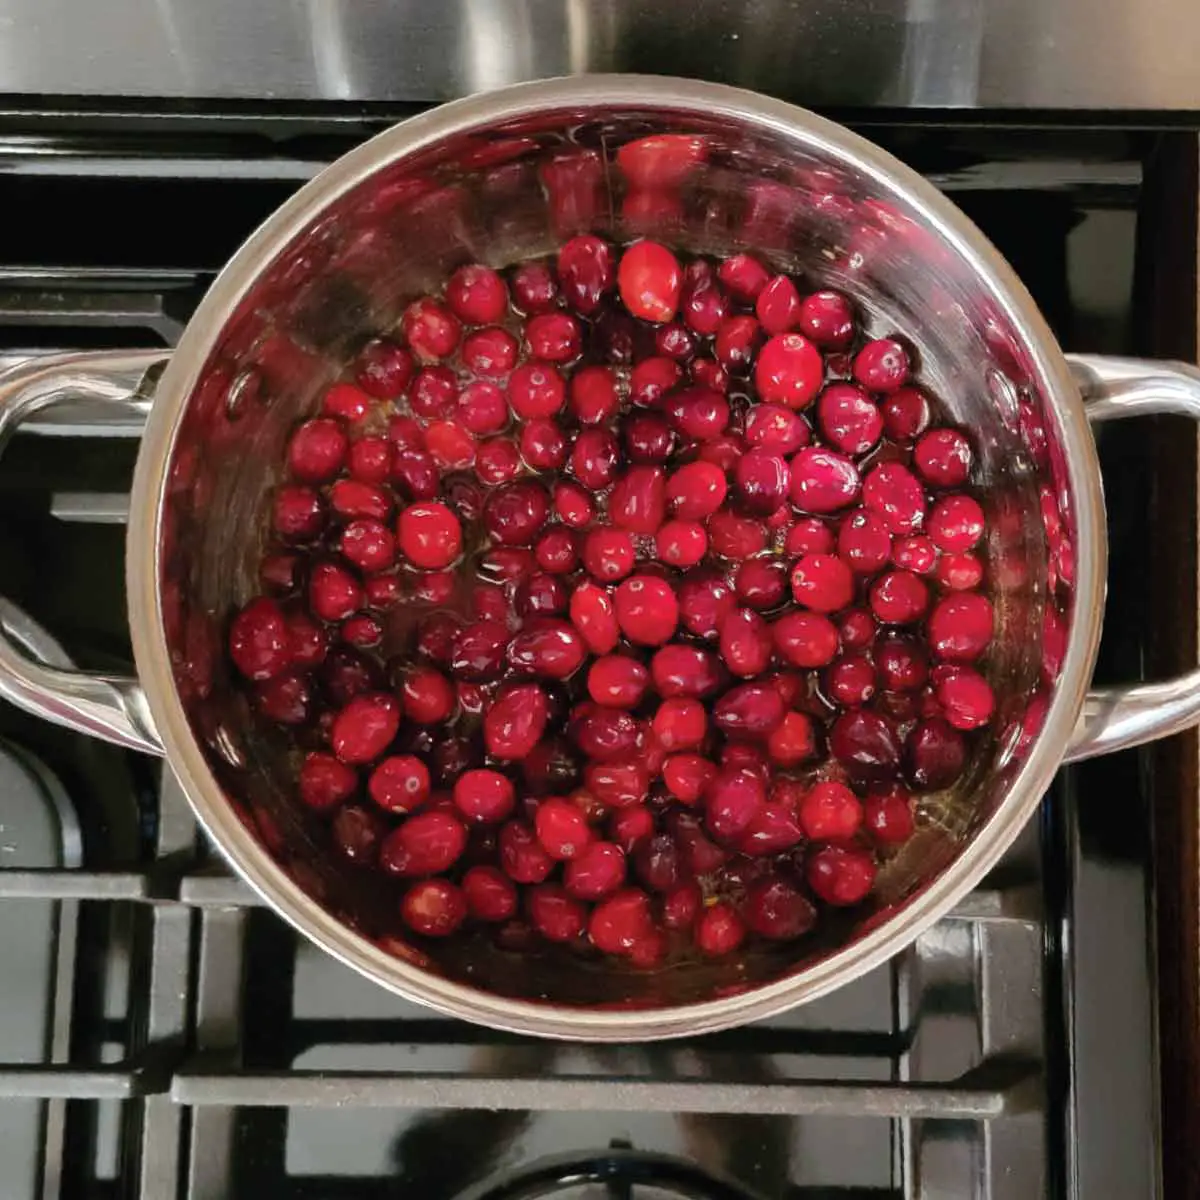 Pot on the stove boiling down the cranberries in the orange juice mixture.